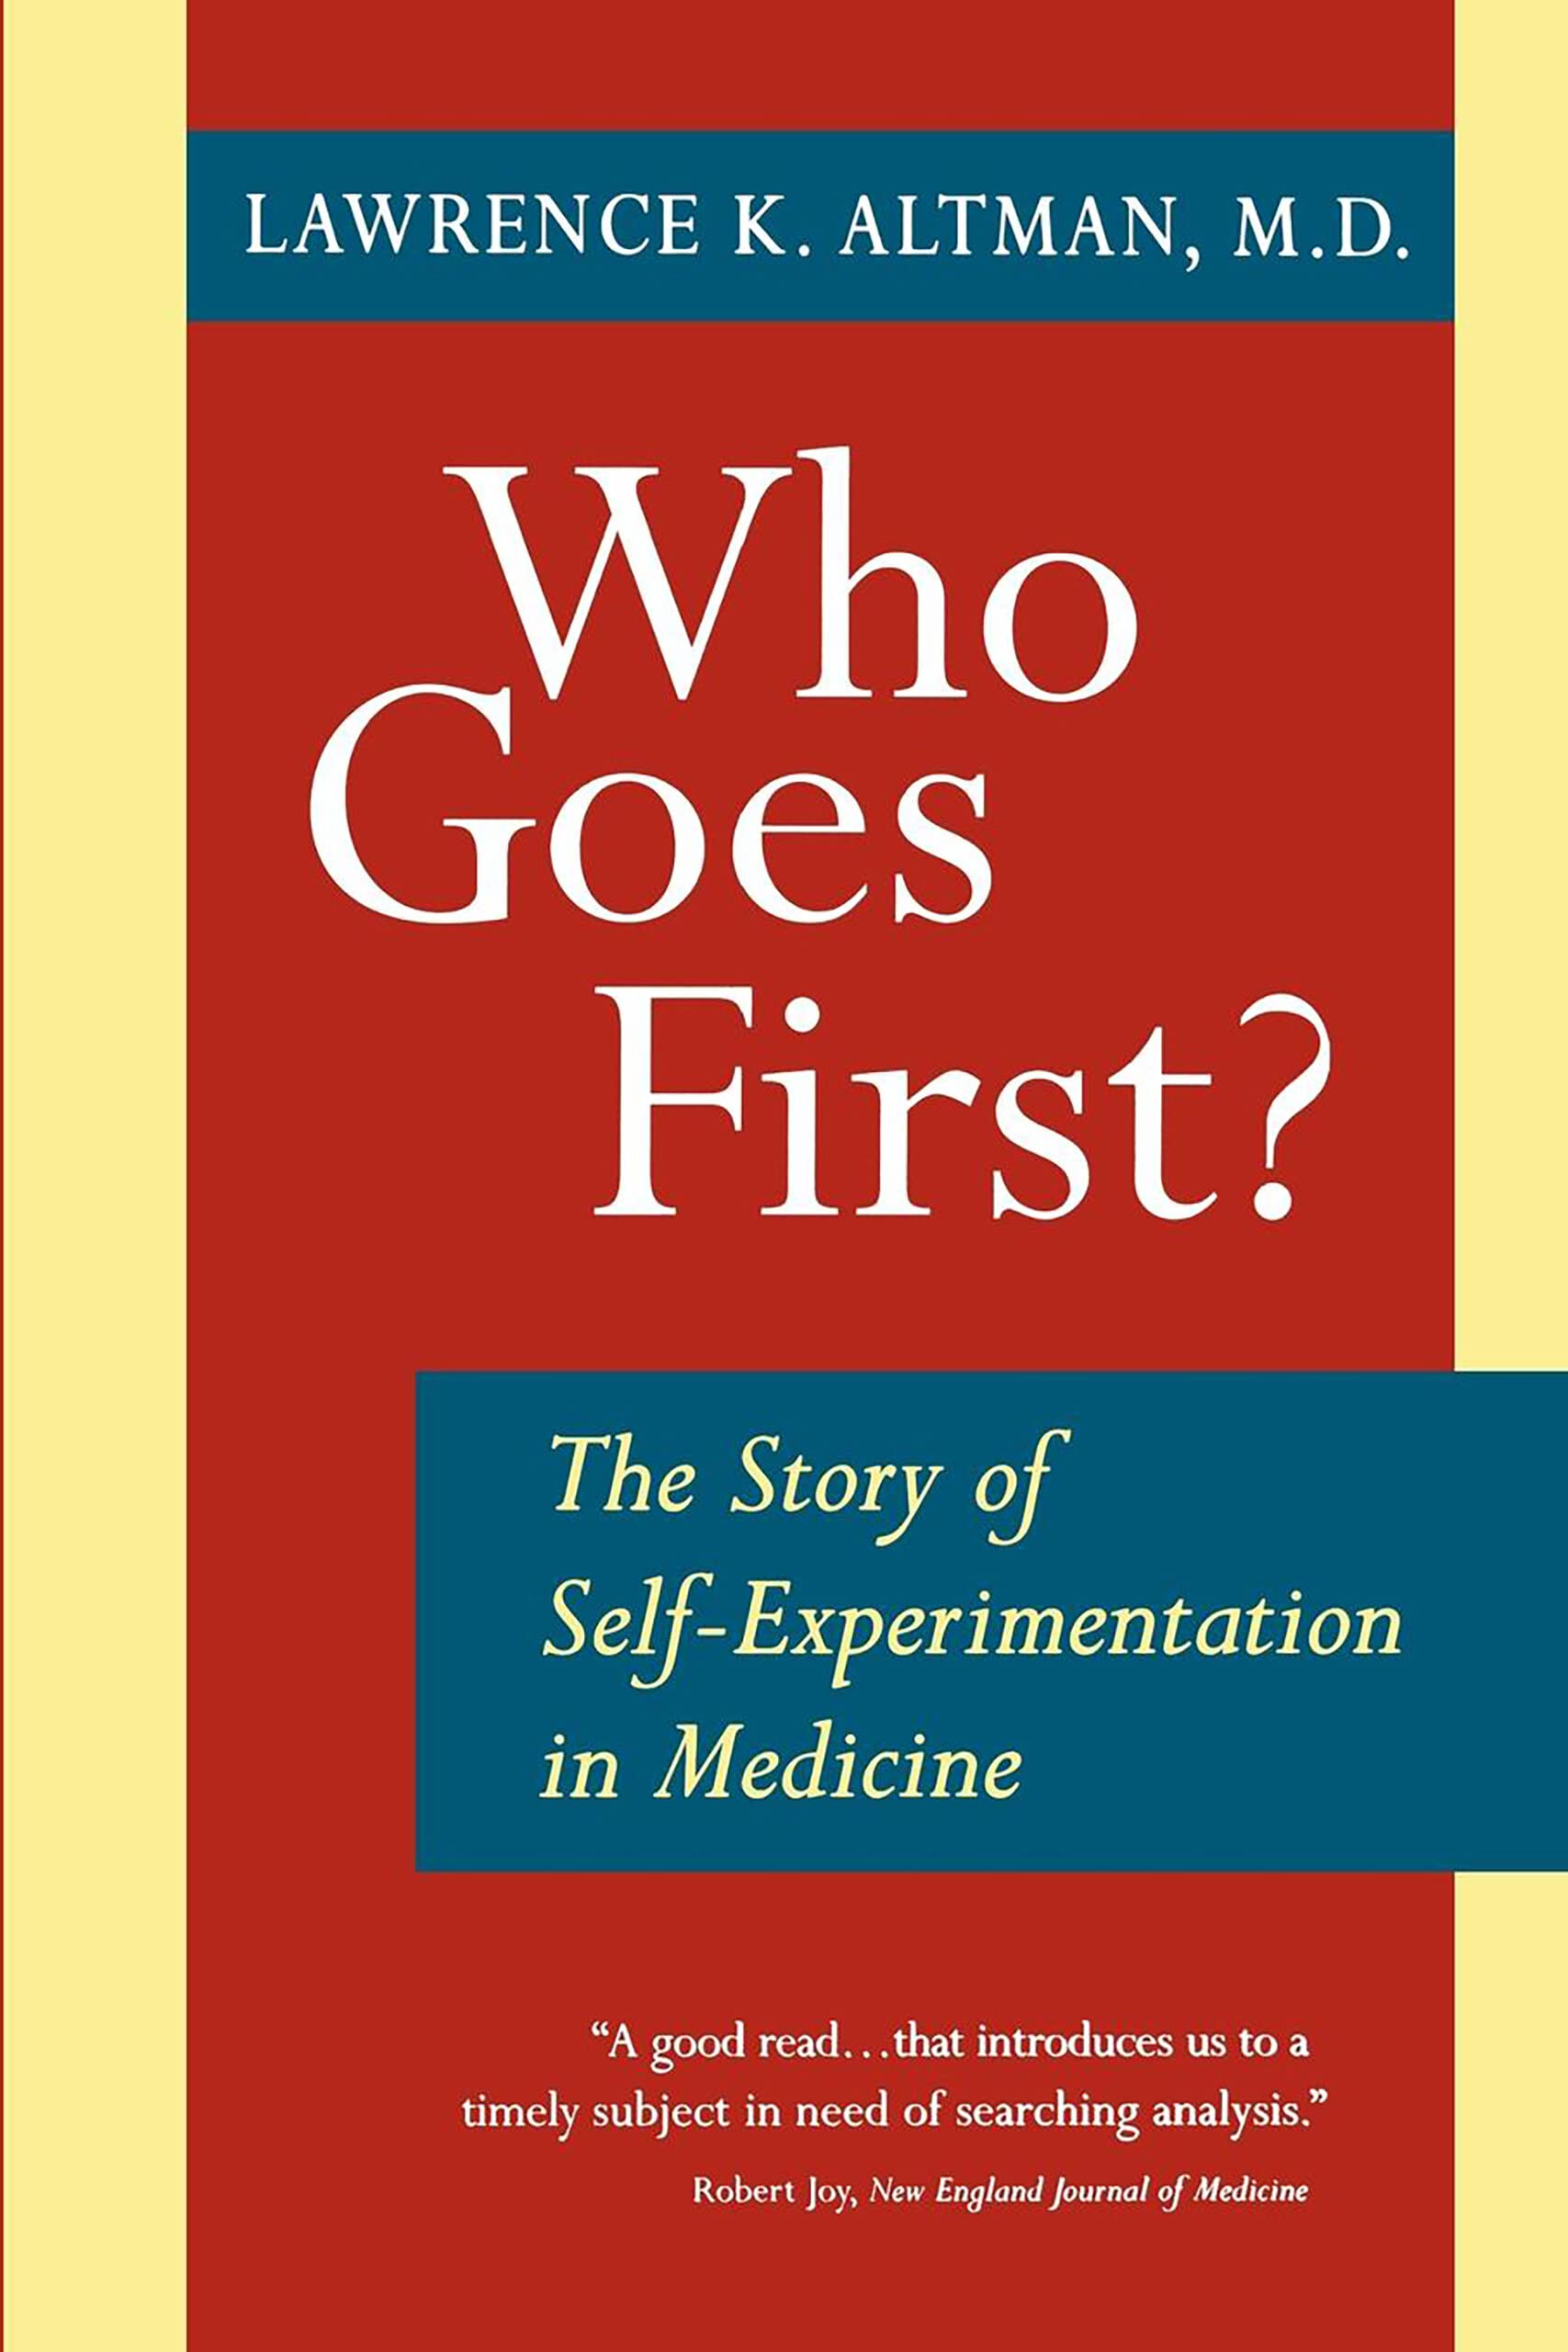 Who Goes First?: The Story of Self-Experimentation in Medicine  by Lawrence K. Altman